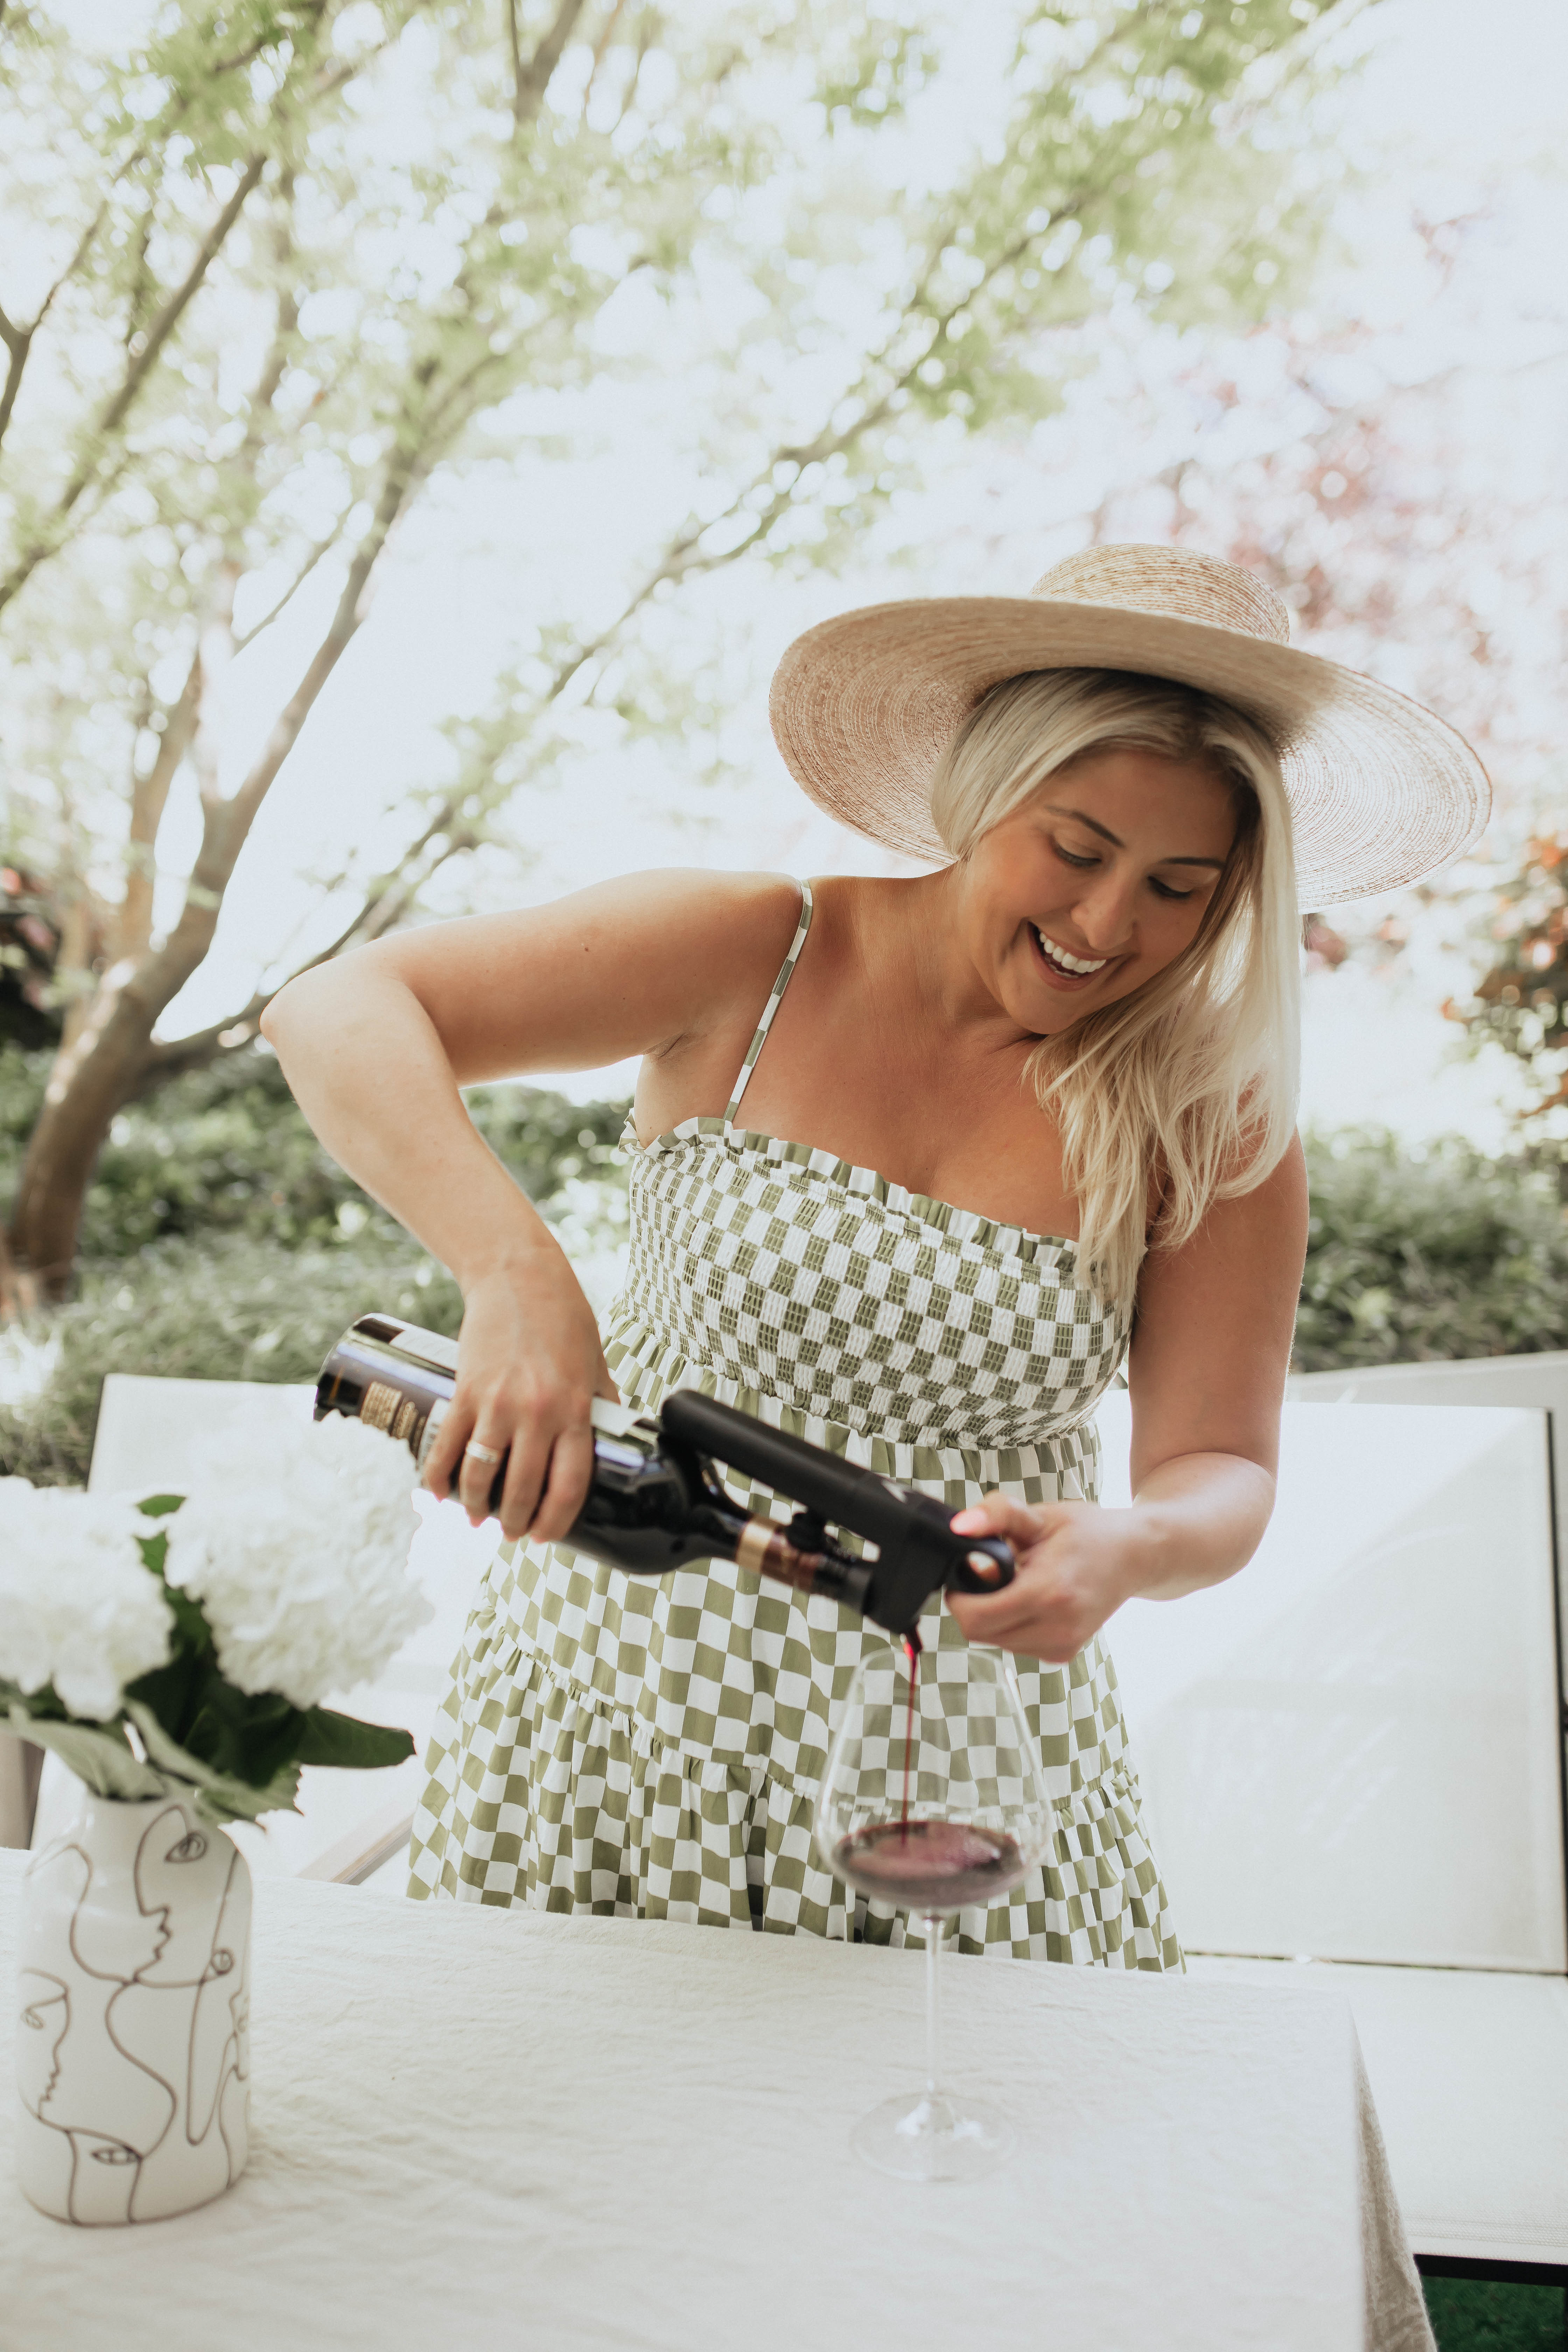 San Francisco fashion and lifestyle blogger KatWalkSF pours wine with the Coravin Pivot in her San Francisco patio.